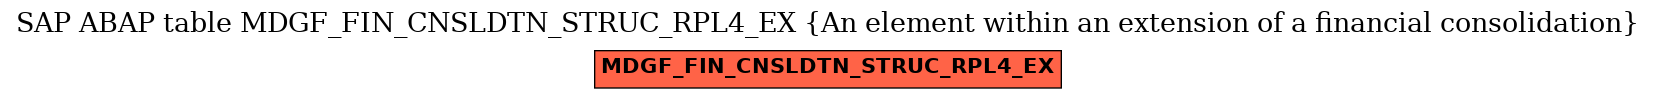 E-R Diagram for table MDGF_FIN_CNSLDTN_STRUC_RPL4_EX (An element within an extension of a financial consolidation)